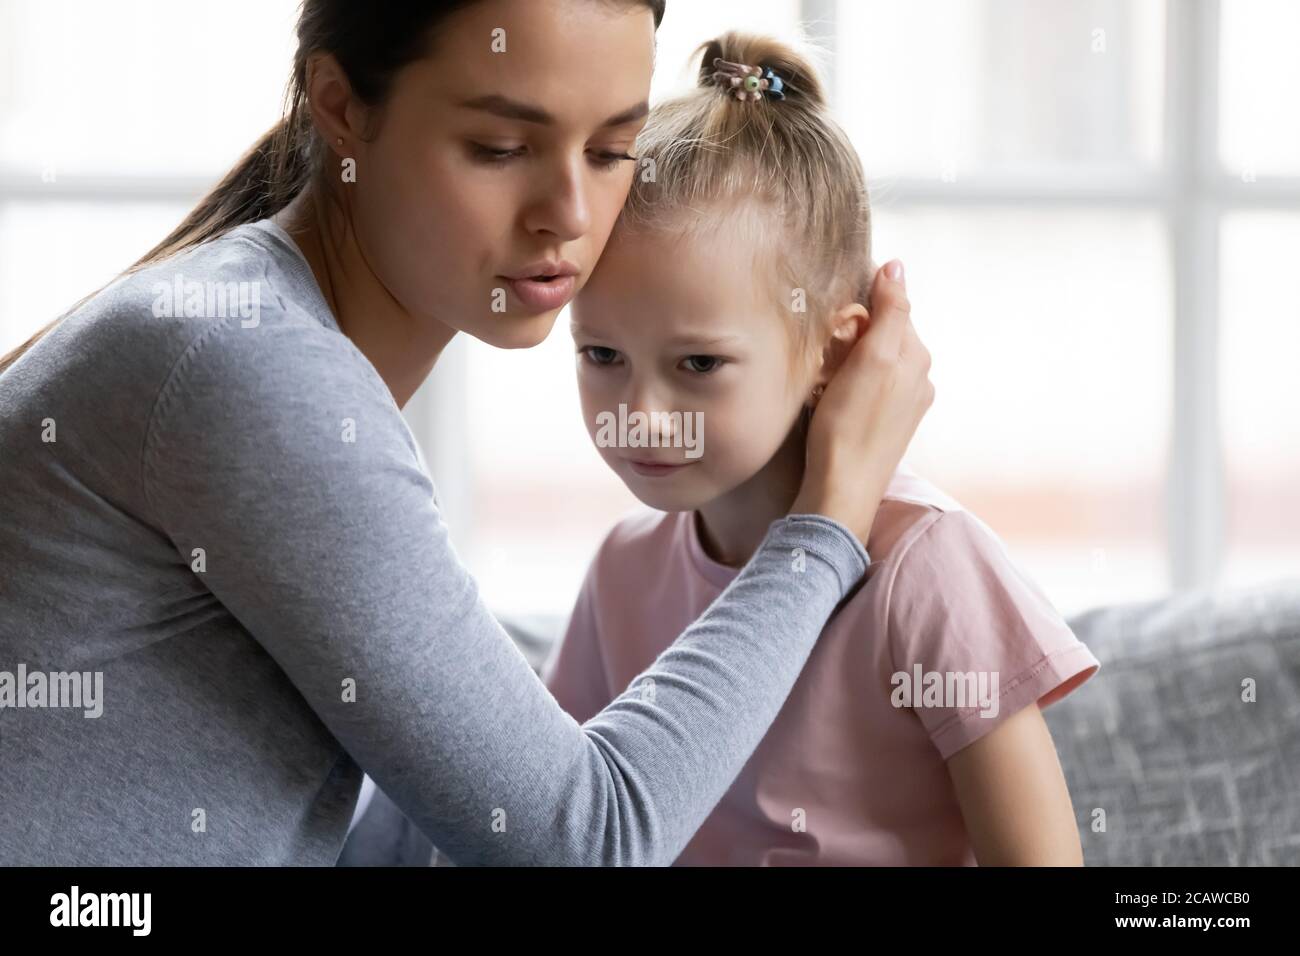 Worrying young mother comforting little stressed crying daughter. Stock Photo